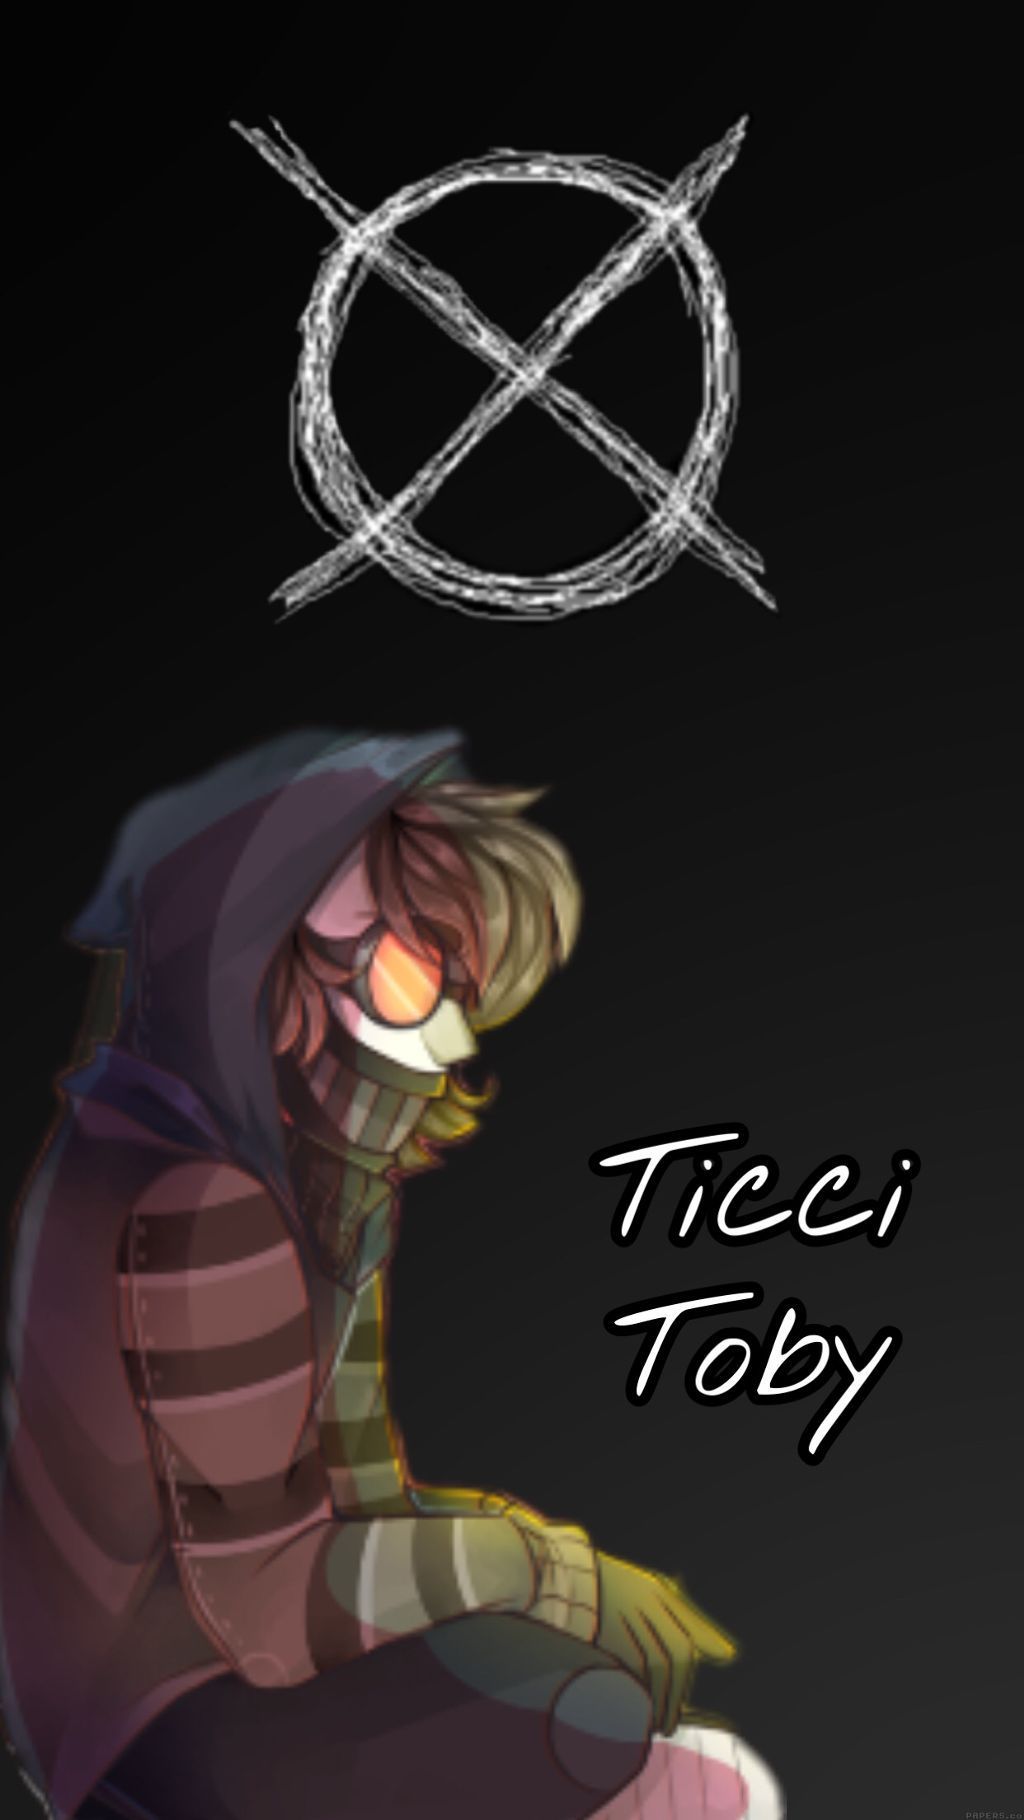 Ticci Toby Wallpaper Free Ticci Toby Background